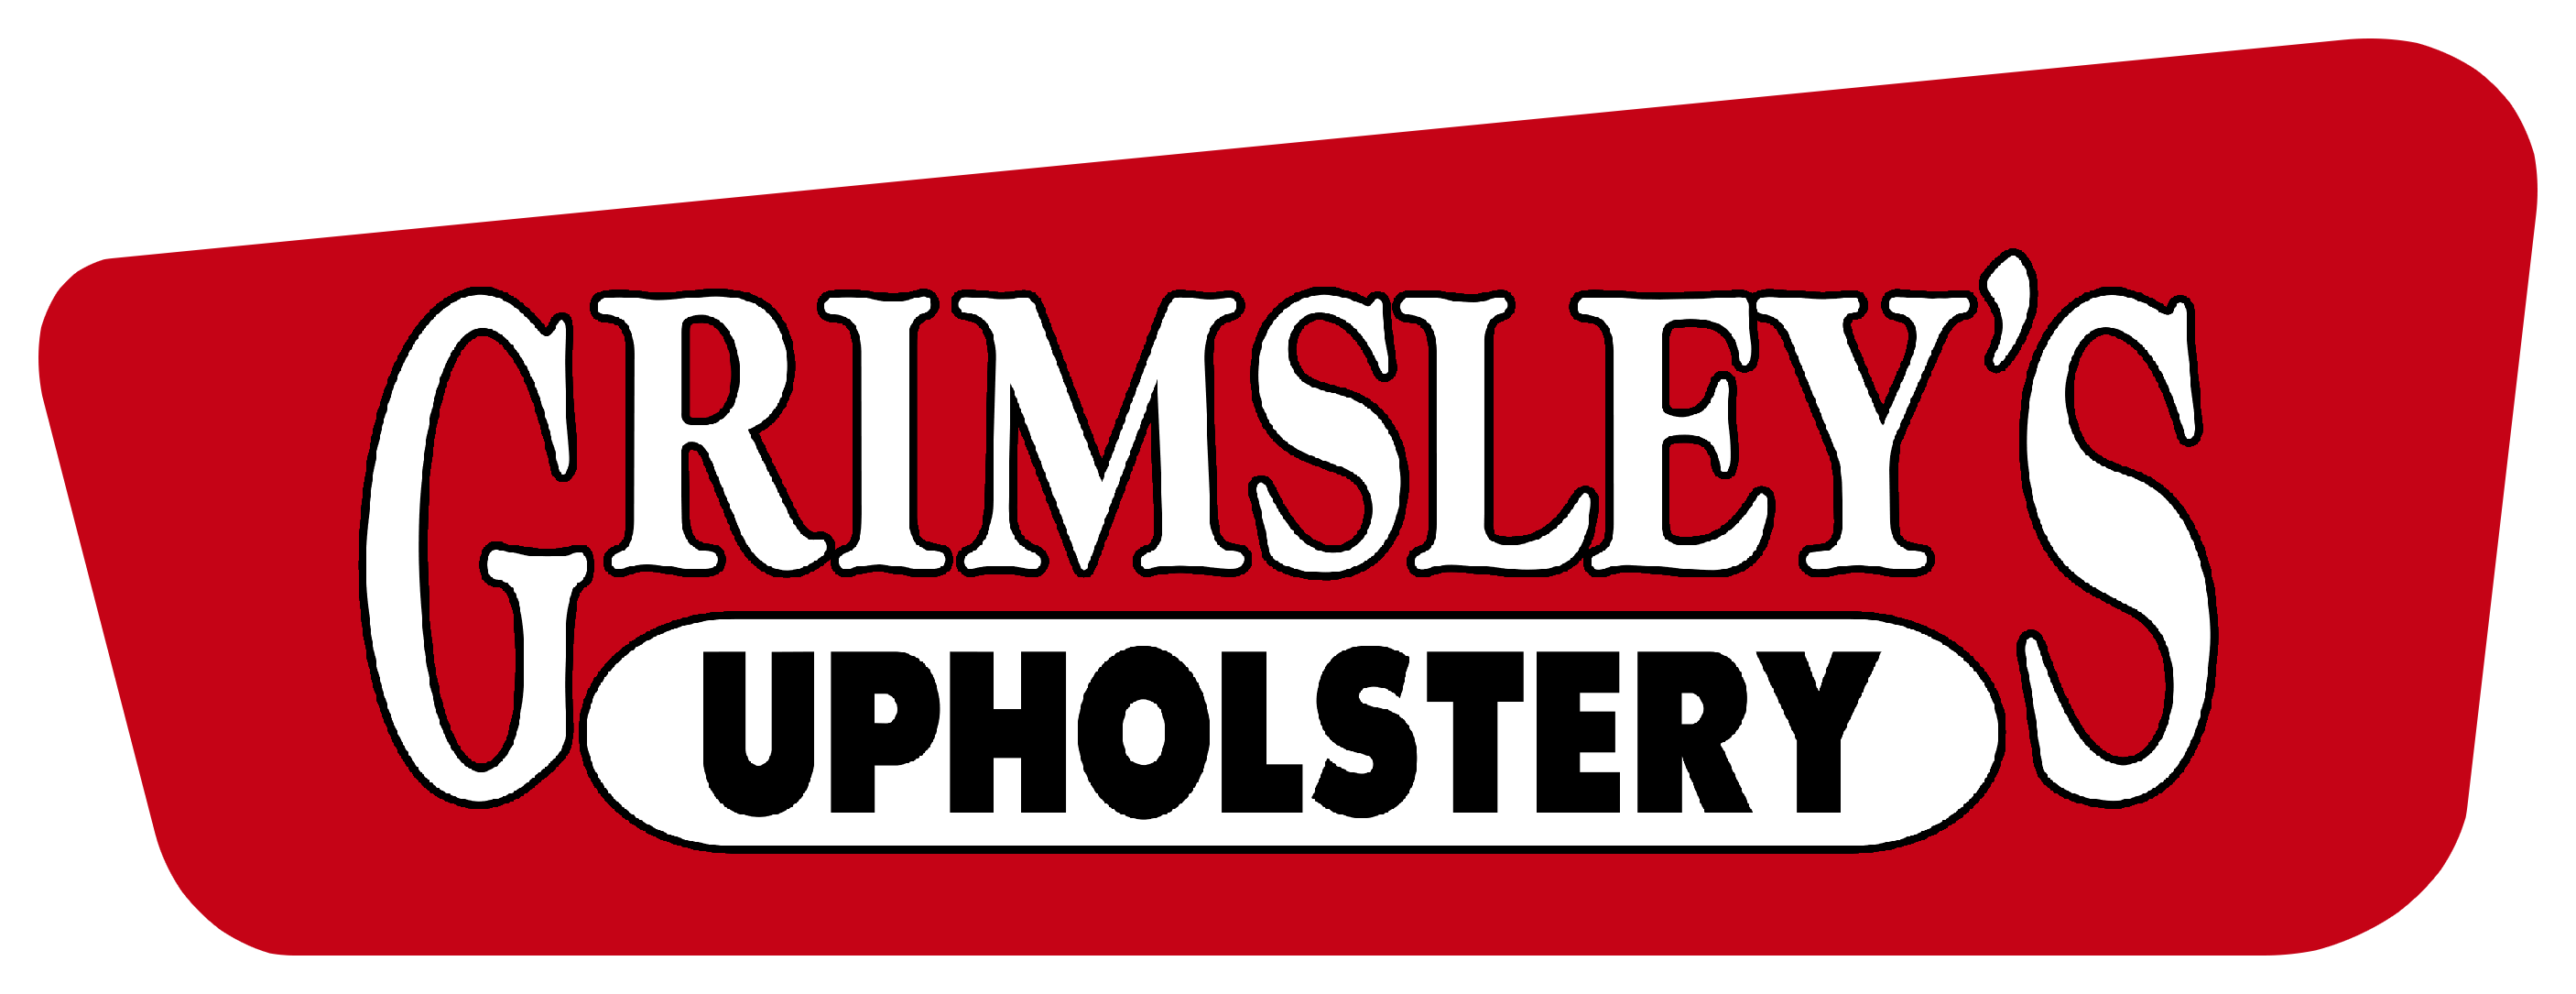 Grimsley's Upholstery